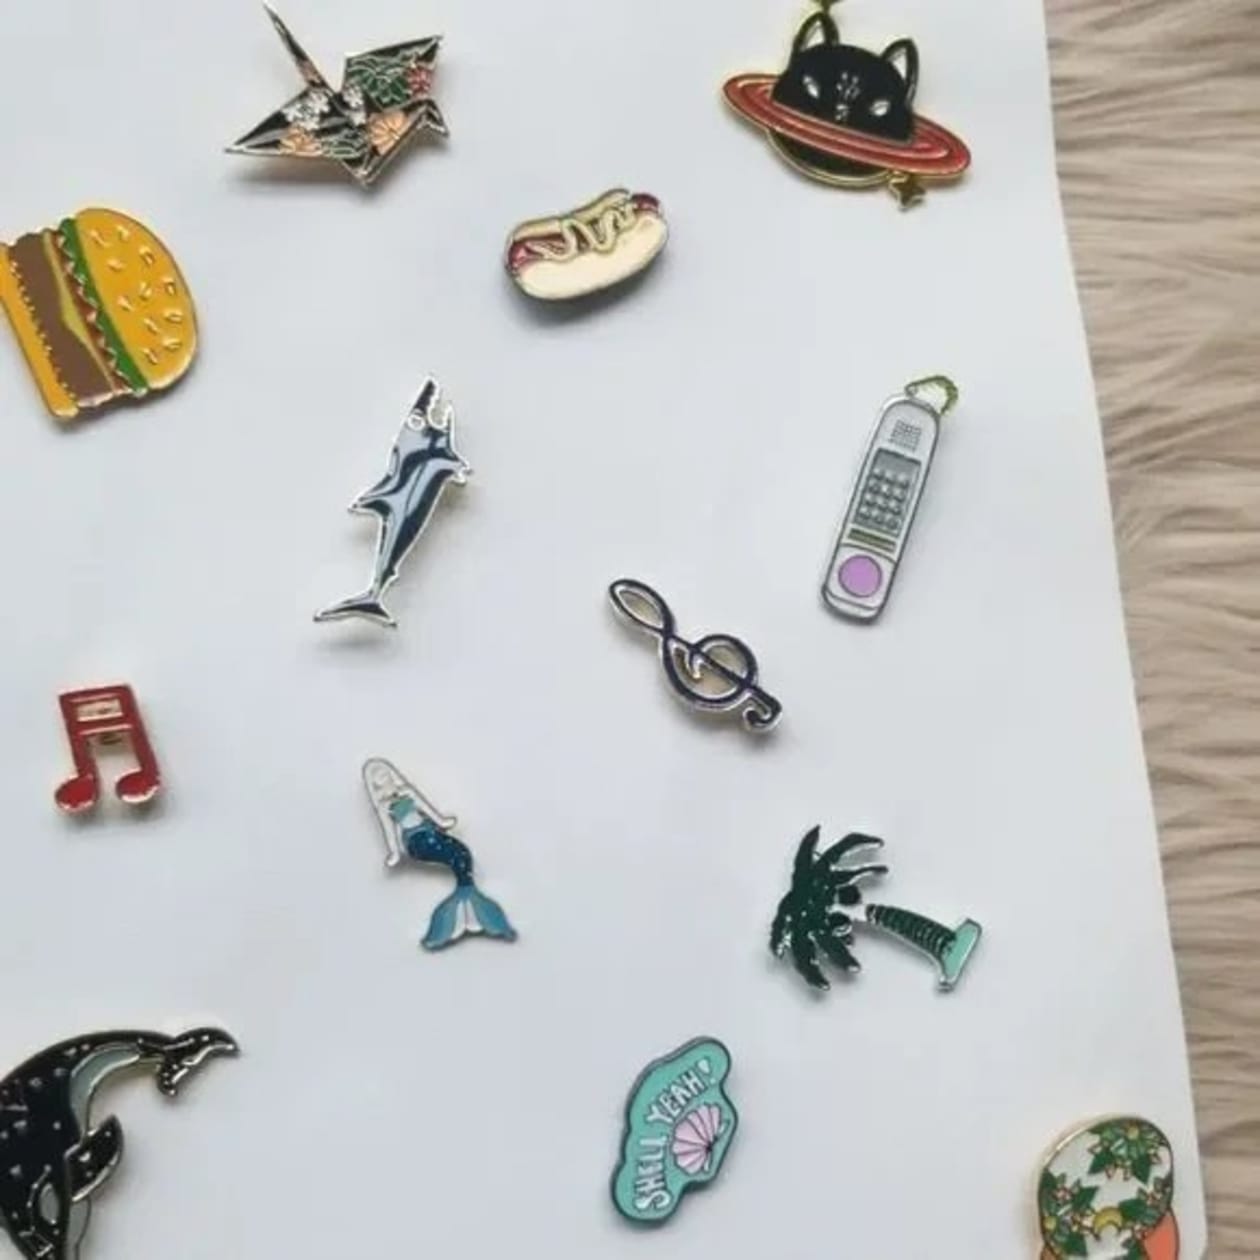 Mystery Enamel Pins Bundle of 20 on Hanging Banner